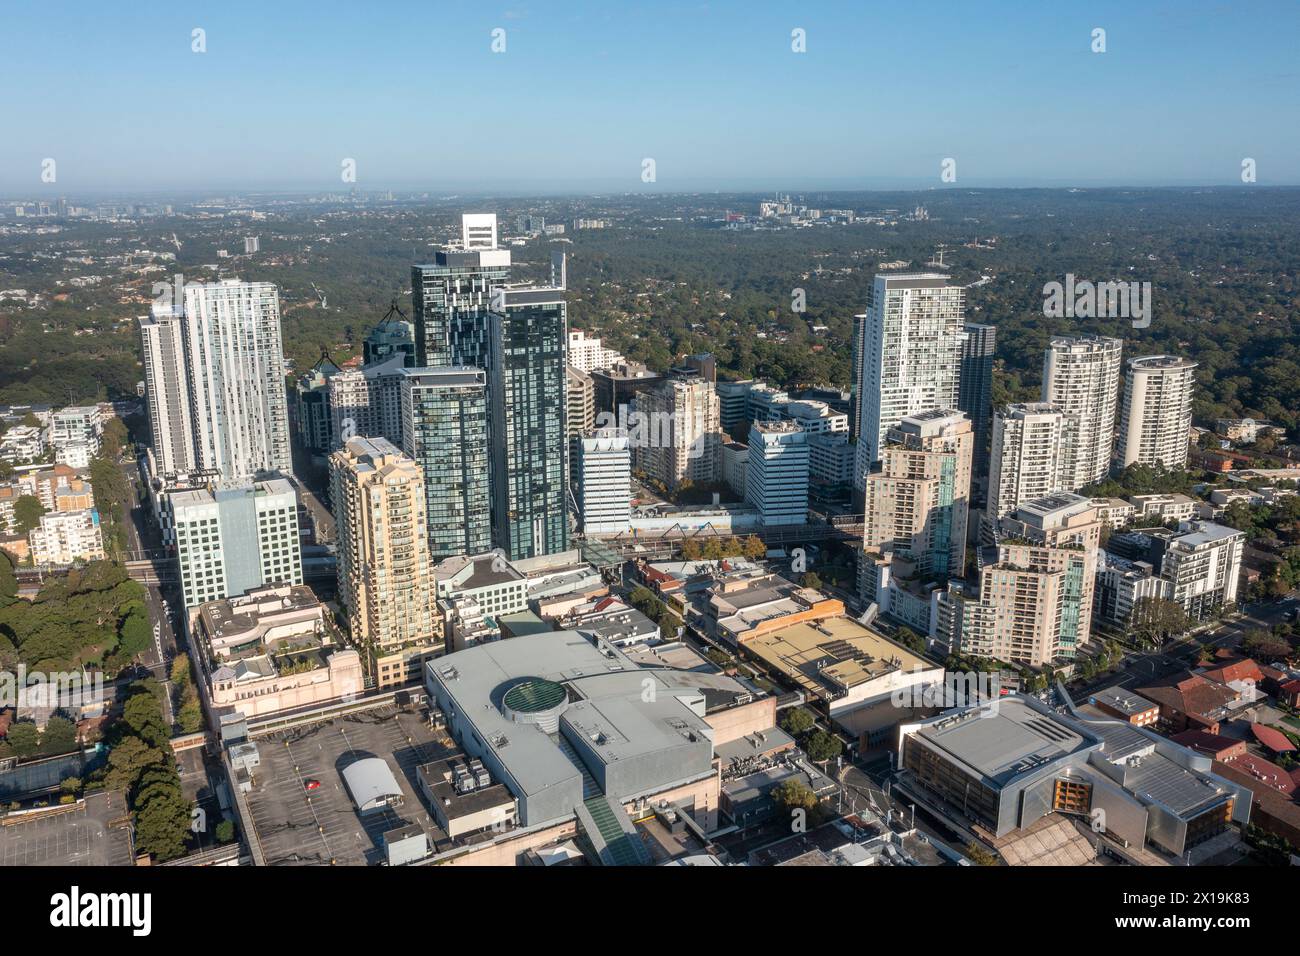 The New South Wales northern  Sydney suburb of Chatswood. Stock Photo